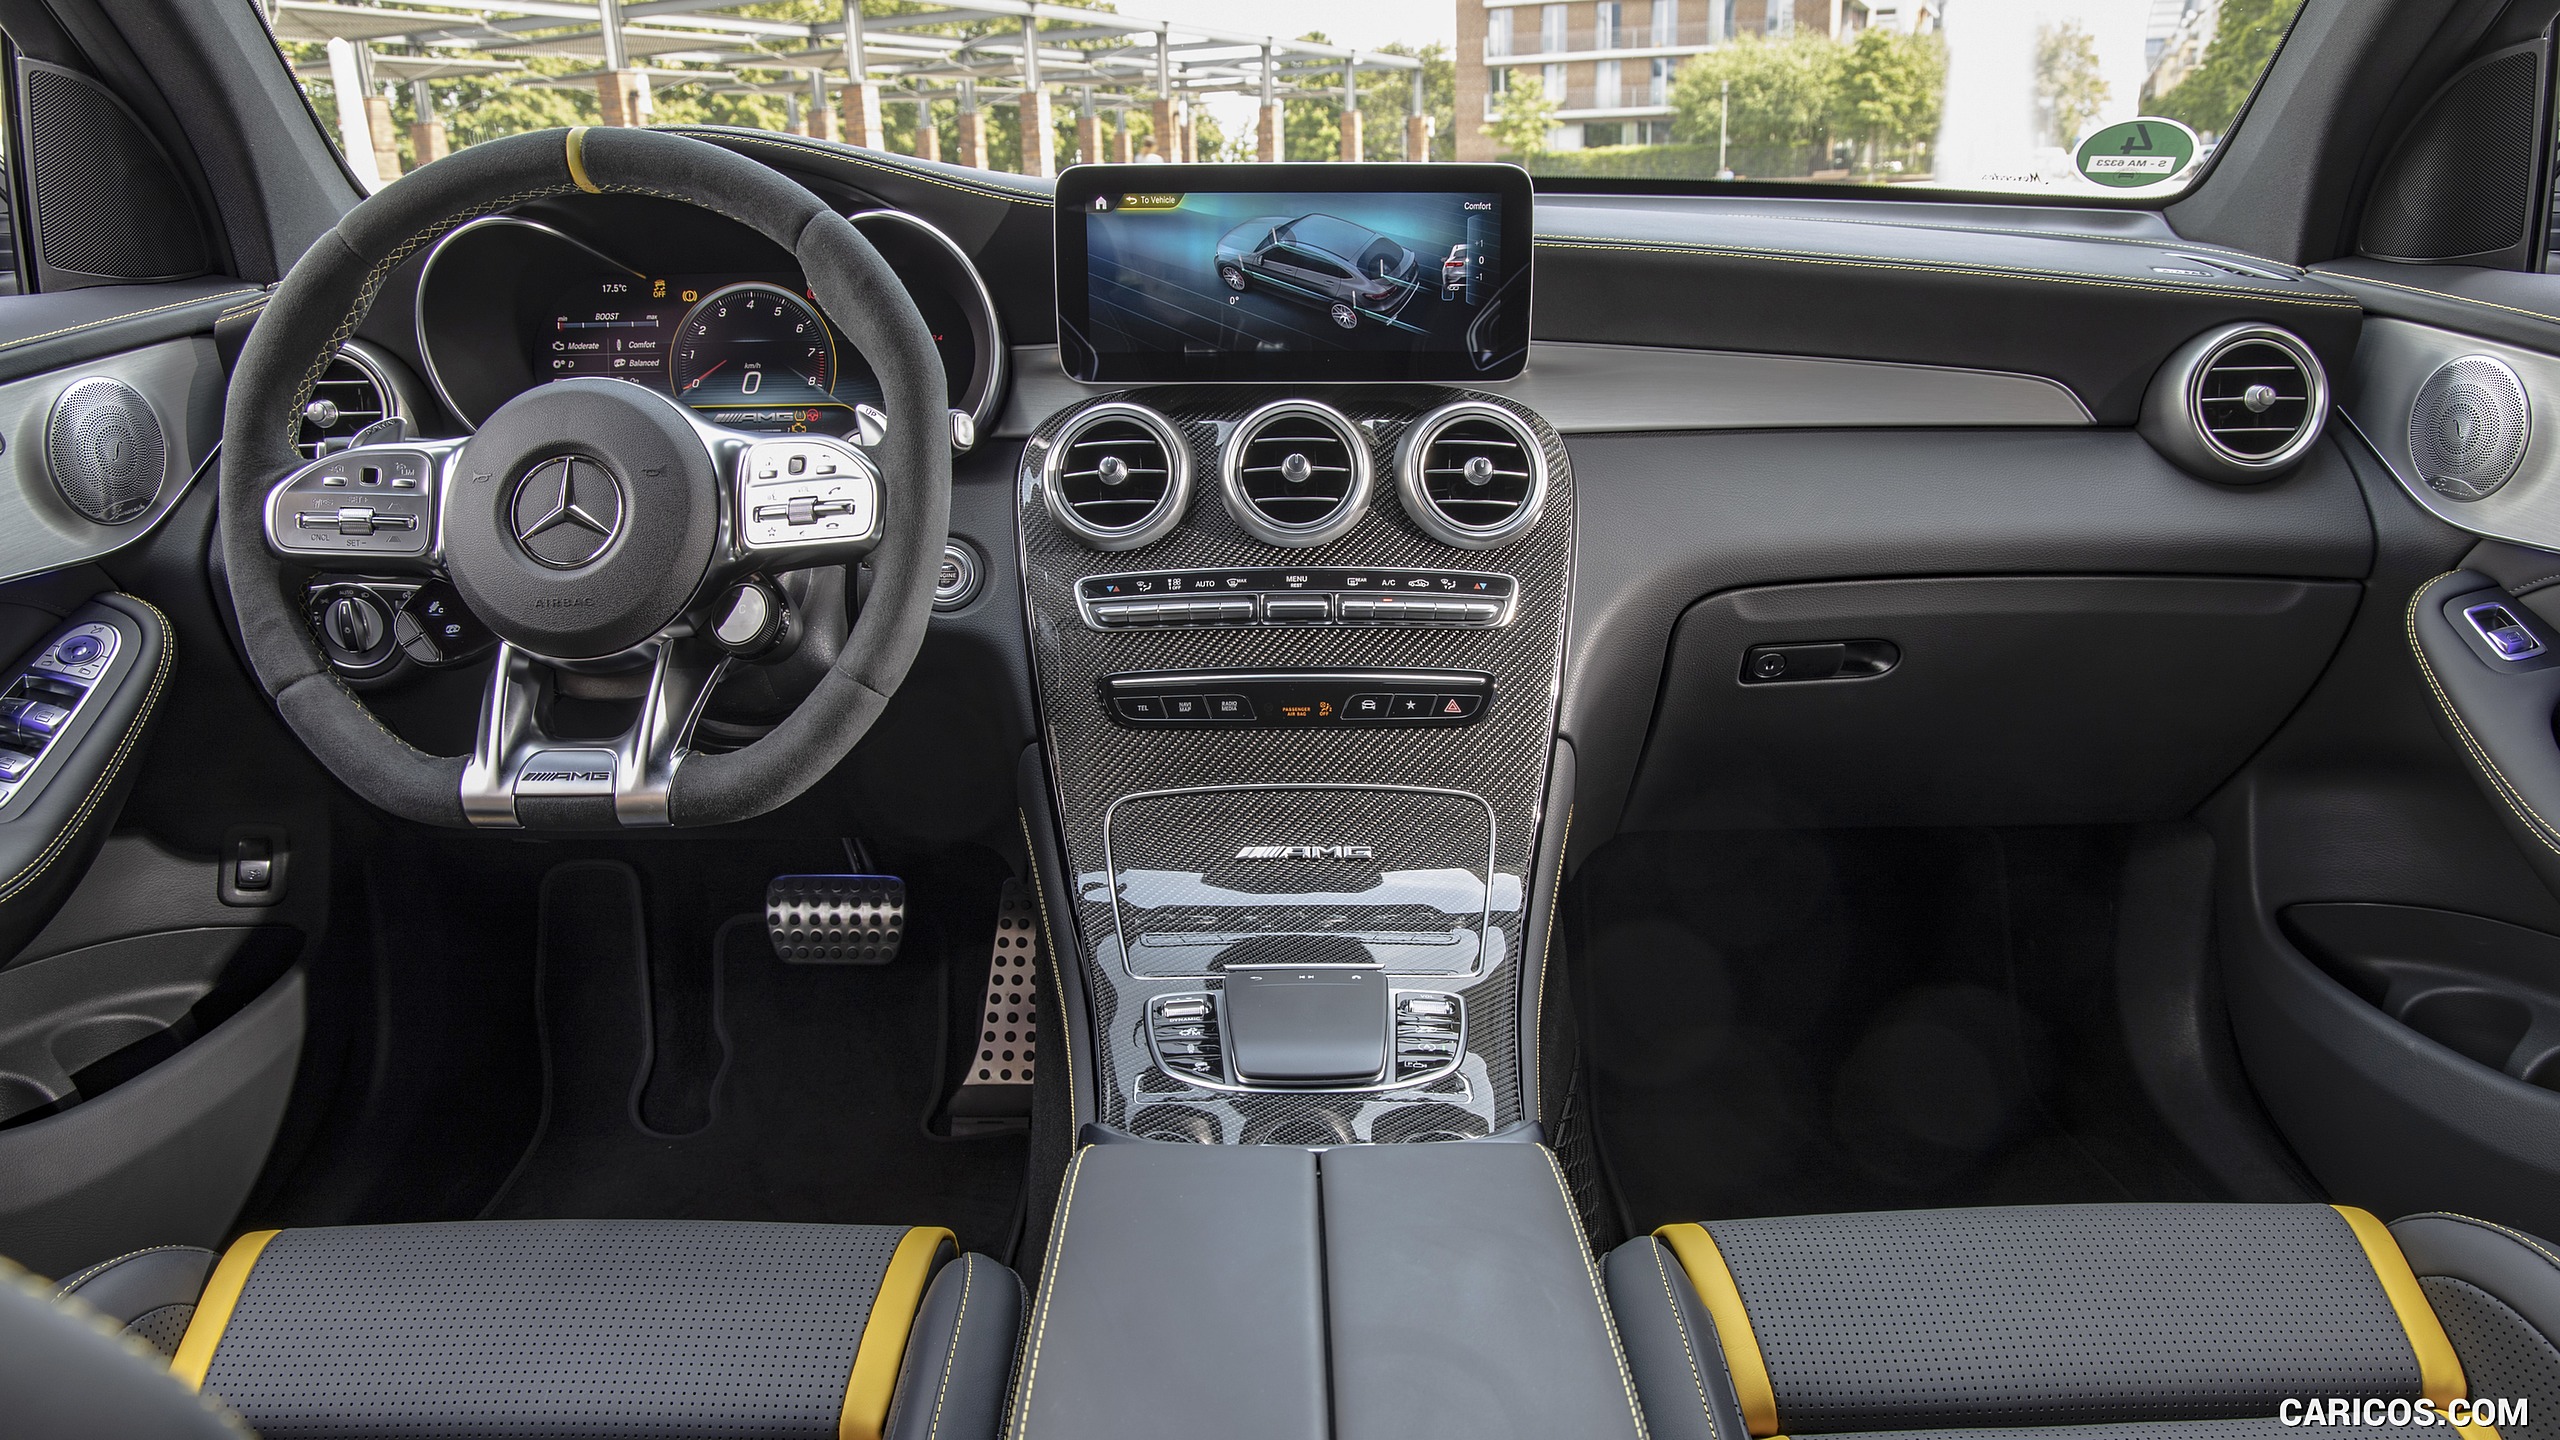 2020 Mercedes-AMG GLC 63 S 4MATIC+ Coupe - Interior, Cockpit, #28 of 102